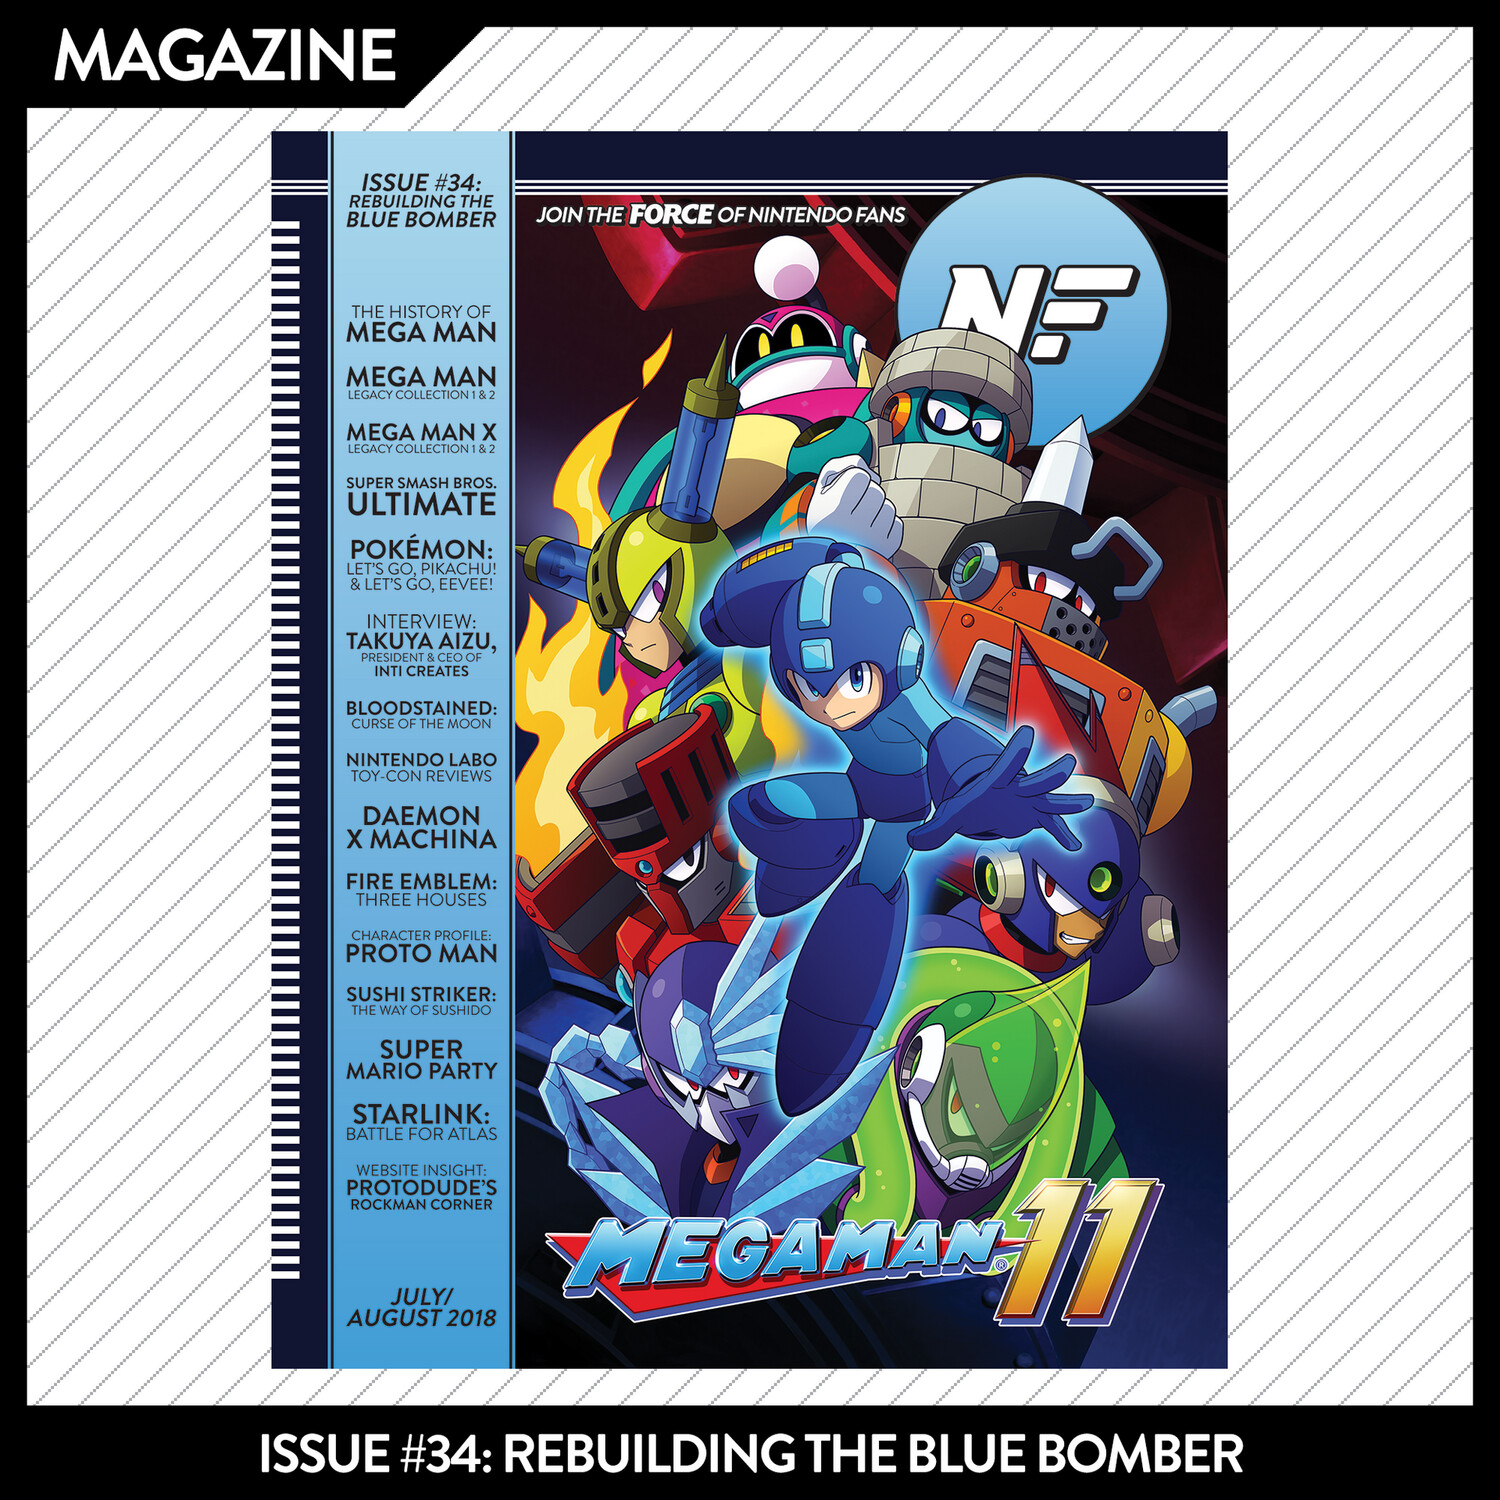 Issue #34: Rebuilding the Blue Bomber – July/August 2018